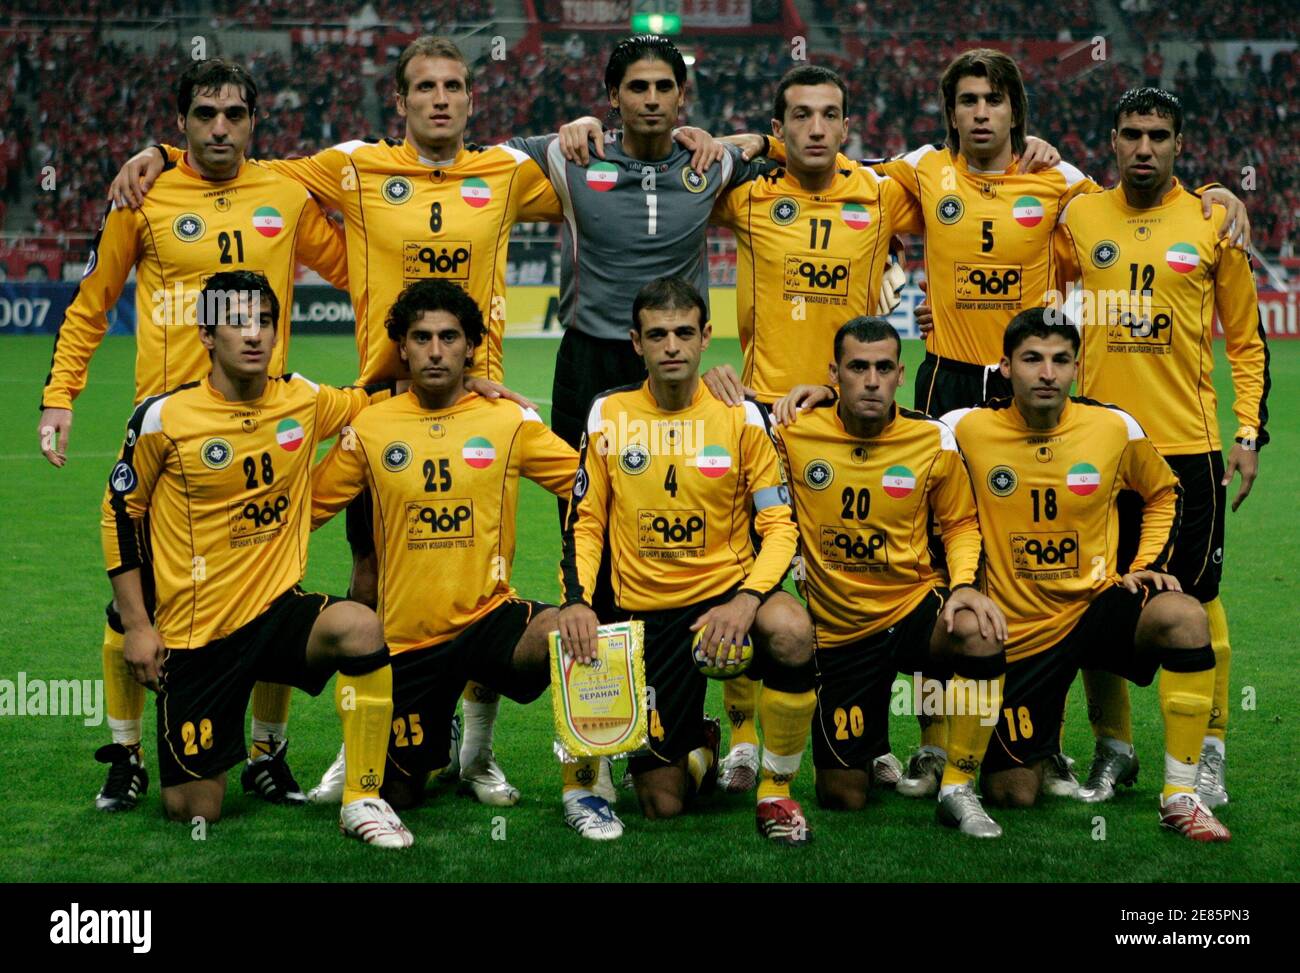 Players of Iran's Sepahan pose for a team photo before their Asian Football Confederation (AFC) Champions League final second leg soccer match against Japan's Urawa Red Diamonds in Saitama, north of Tokyo, November 14, 2007. Urawa Reds clinched the AFC Champions League title when they beat Iran's Sepahan 2-0 in match on Wednesday for a 3-1 aggregate victory in the final. Front L-R: Ehsan Hajysafi, Ebrahim Loveinian, Moharram Navidkia, Emad Ridha and Mohsen Hamidi. Rear back L-R: Saeid Mirgeloui Bayat, Mohsen Bengar, Abbas Mohammadi Shah Abadi, Jaba Mujiri, Seyed Hadi Aghily Anvar and Abdul Wah Stock Photo